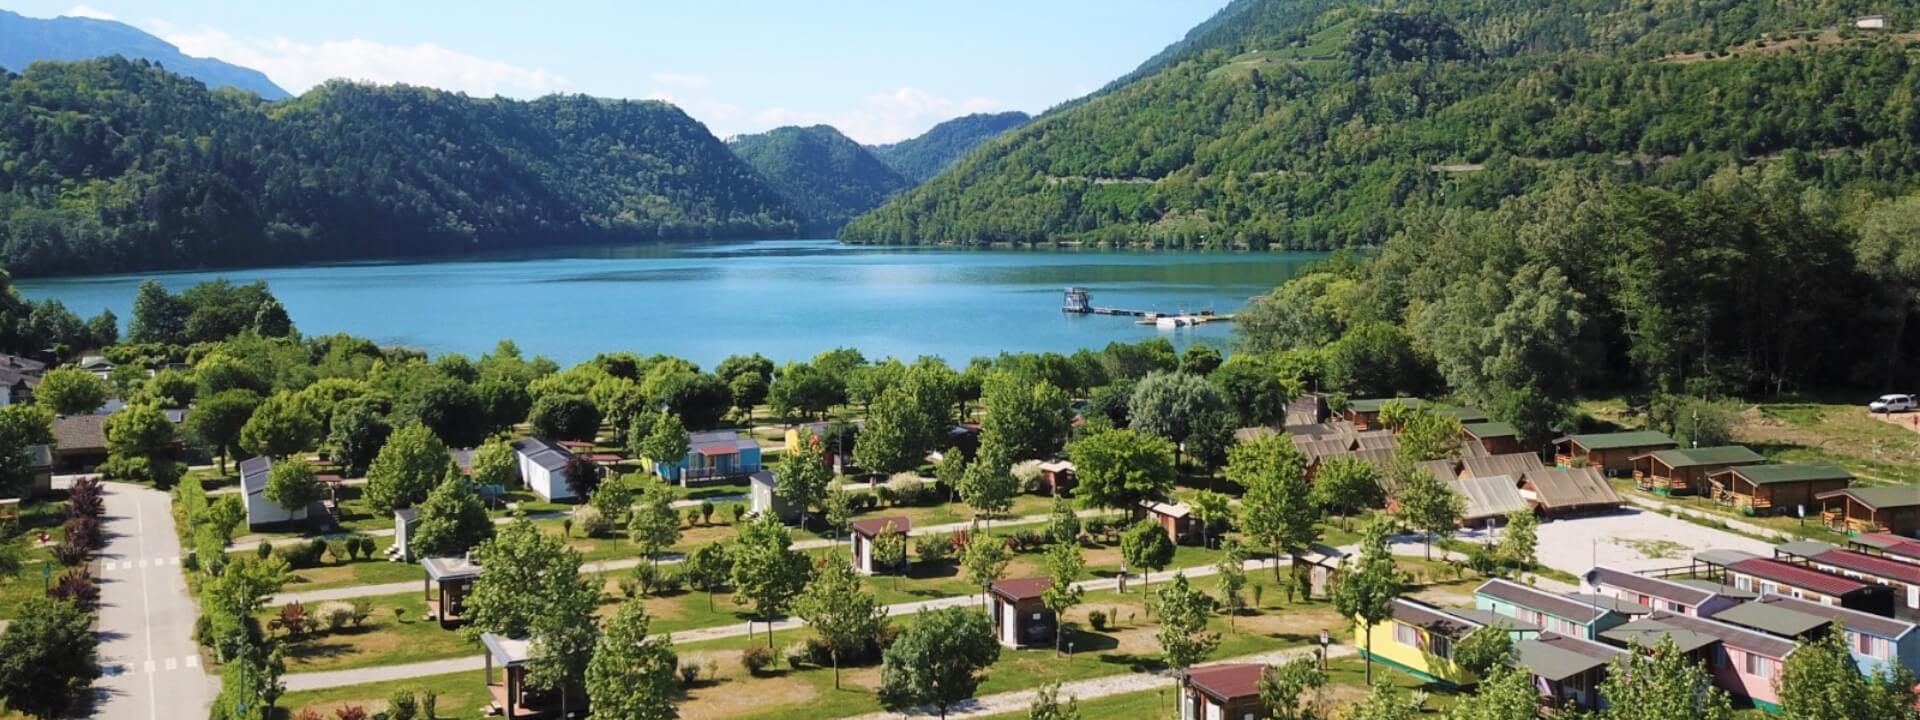 campinglevico en september-offer-mobile-home-campsite-lake-levico-with-swimming-pool-and-beach 005